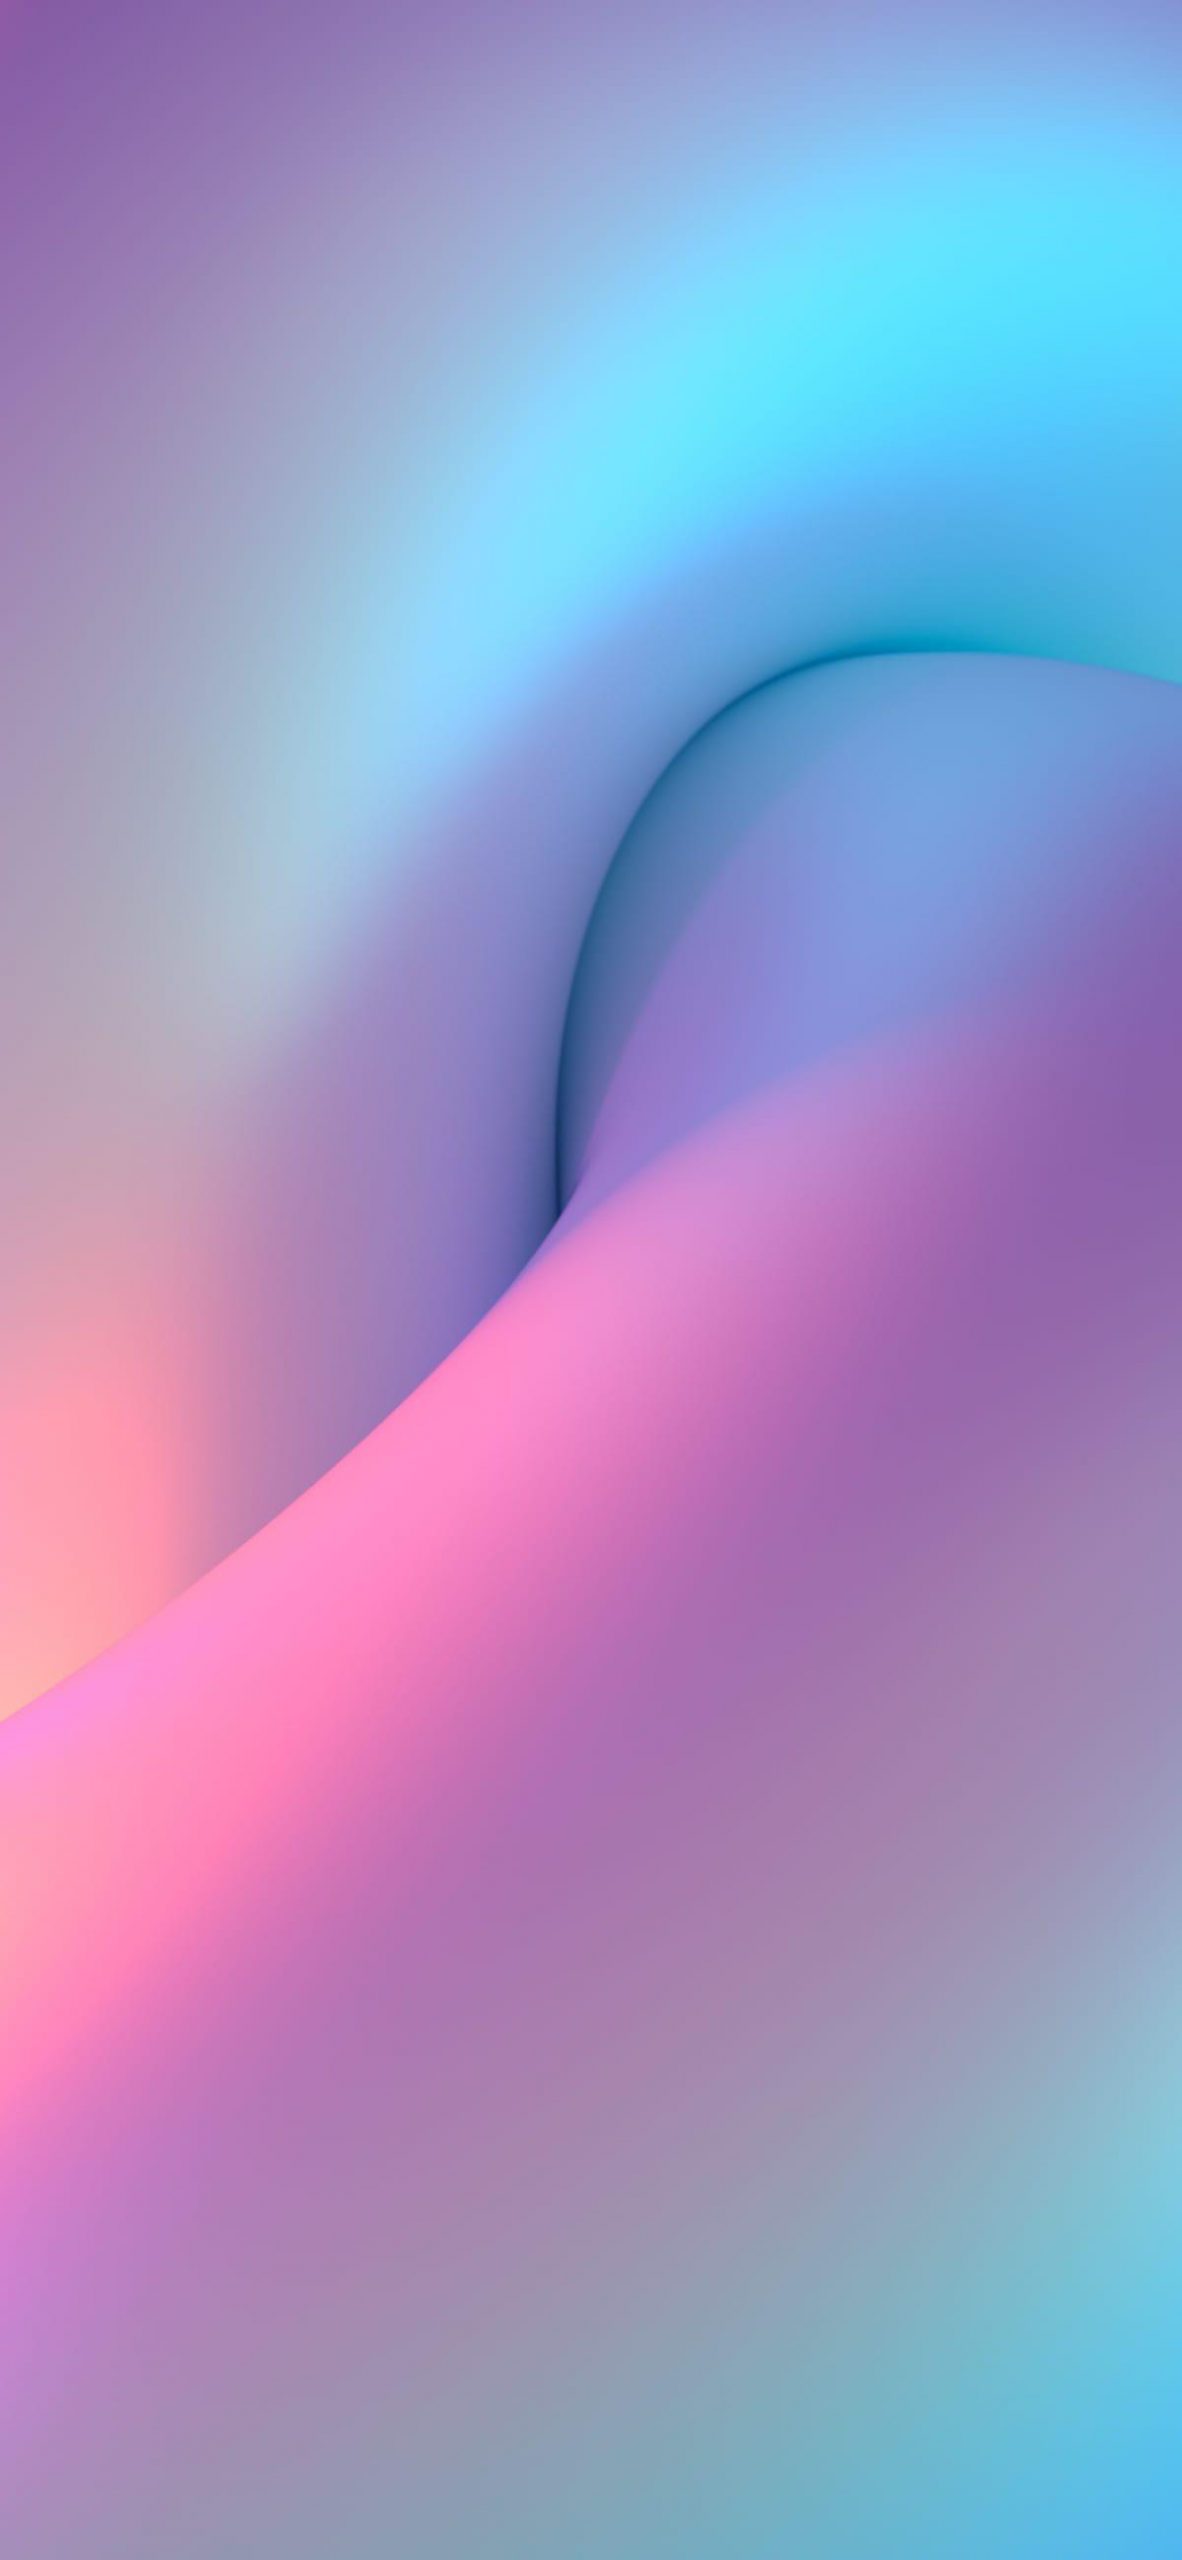 Wallpaper For Iphone 12 Pro Max Wallpapers